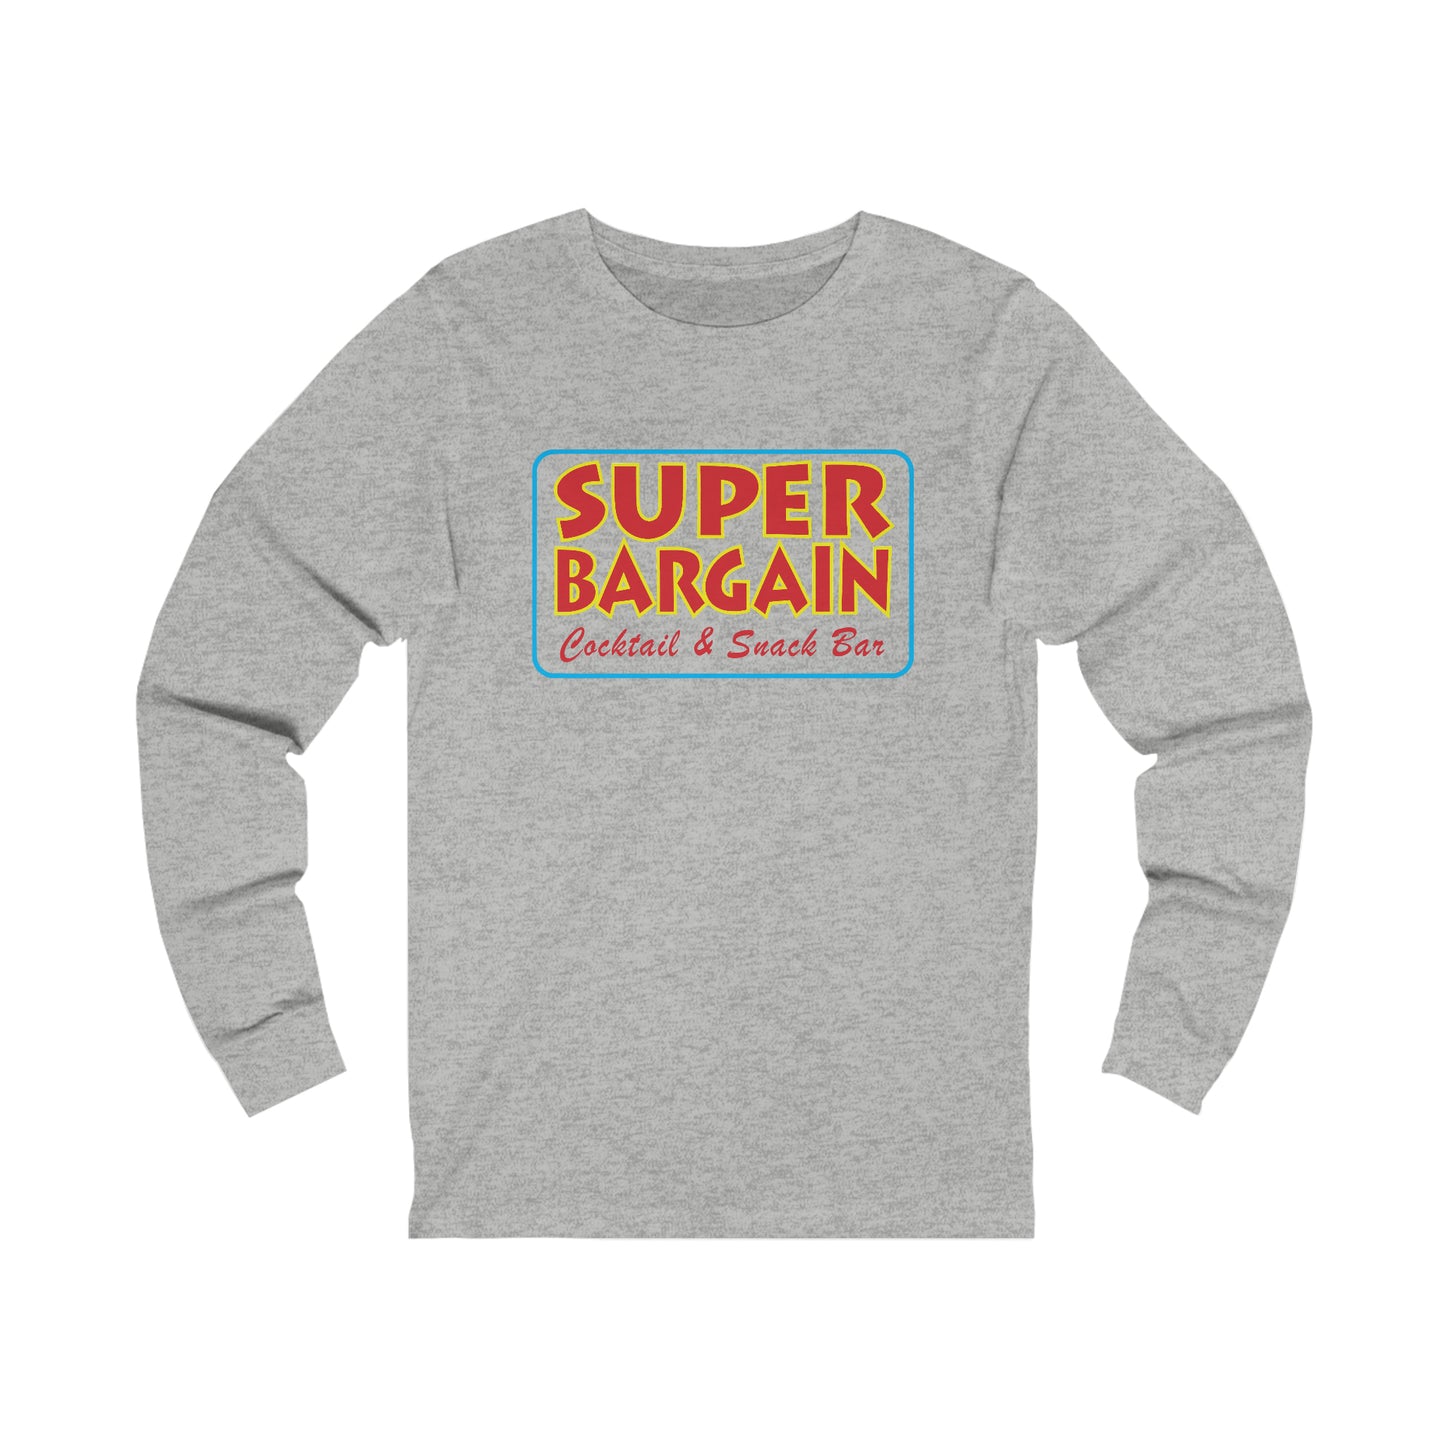 A Printify Unisex Jersey Long Sleeve Signature Logo Tee featuring a colorful logo with the text "Super Bargain Cocktail & Snack Bar" in blue, yellow, and red on the chest area, highlighting the Cabbagetown district.